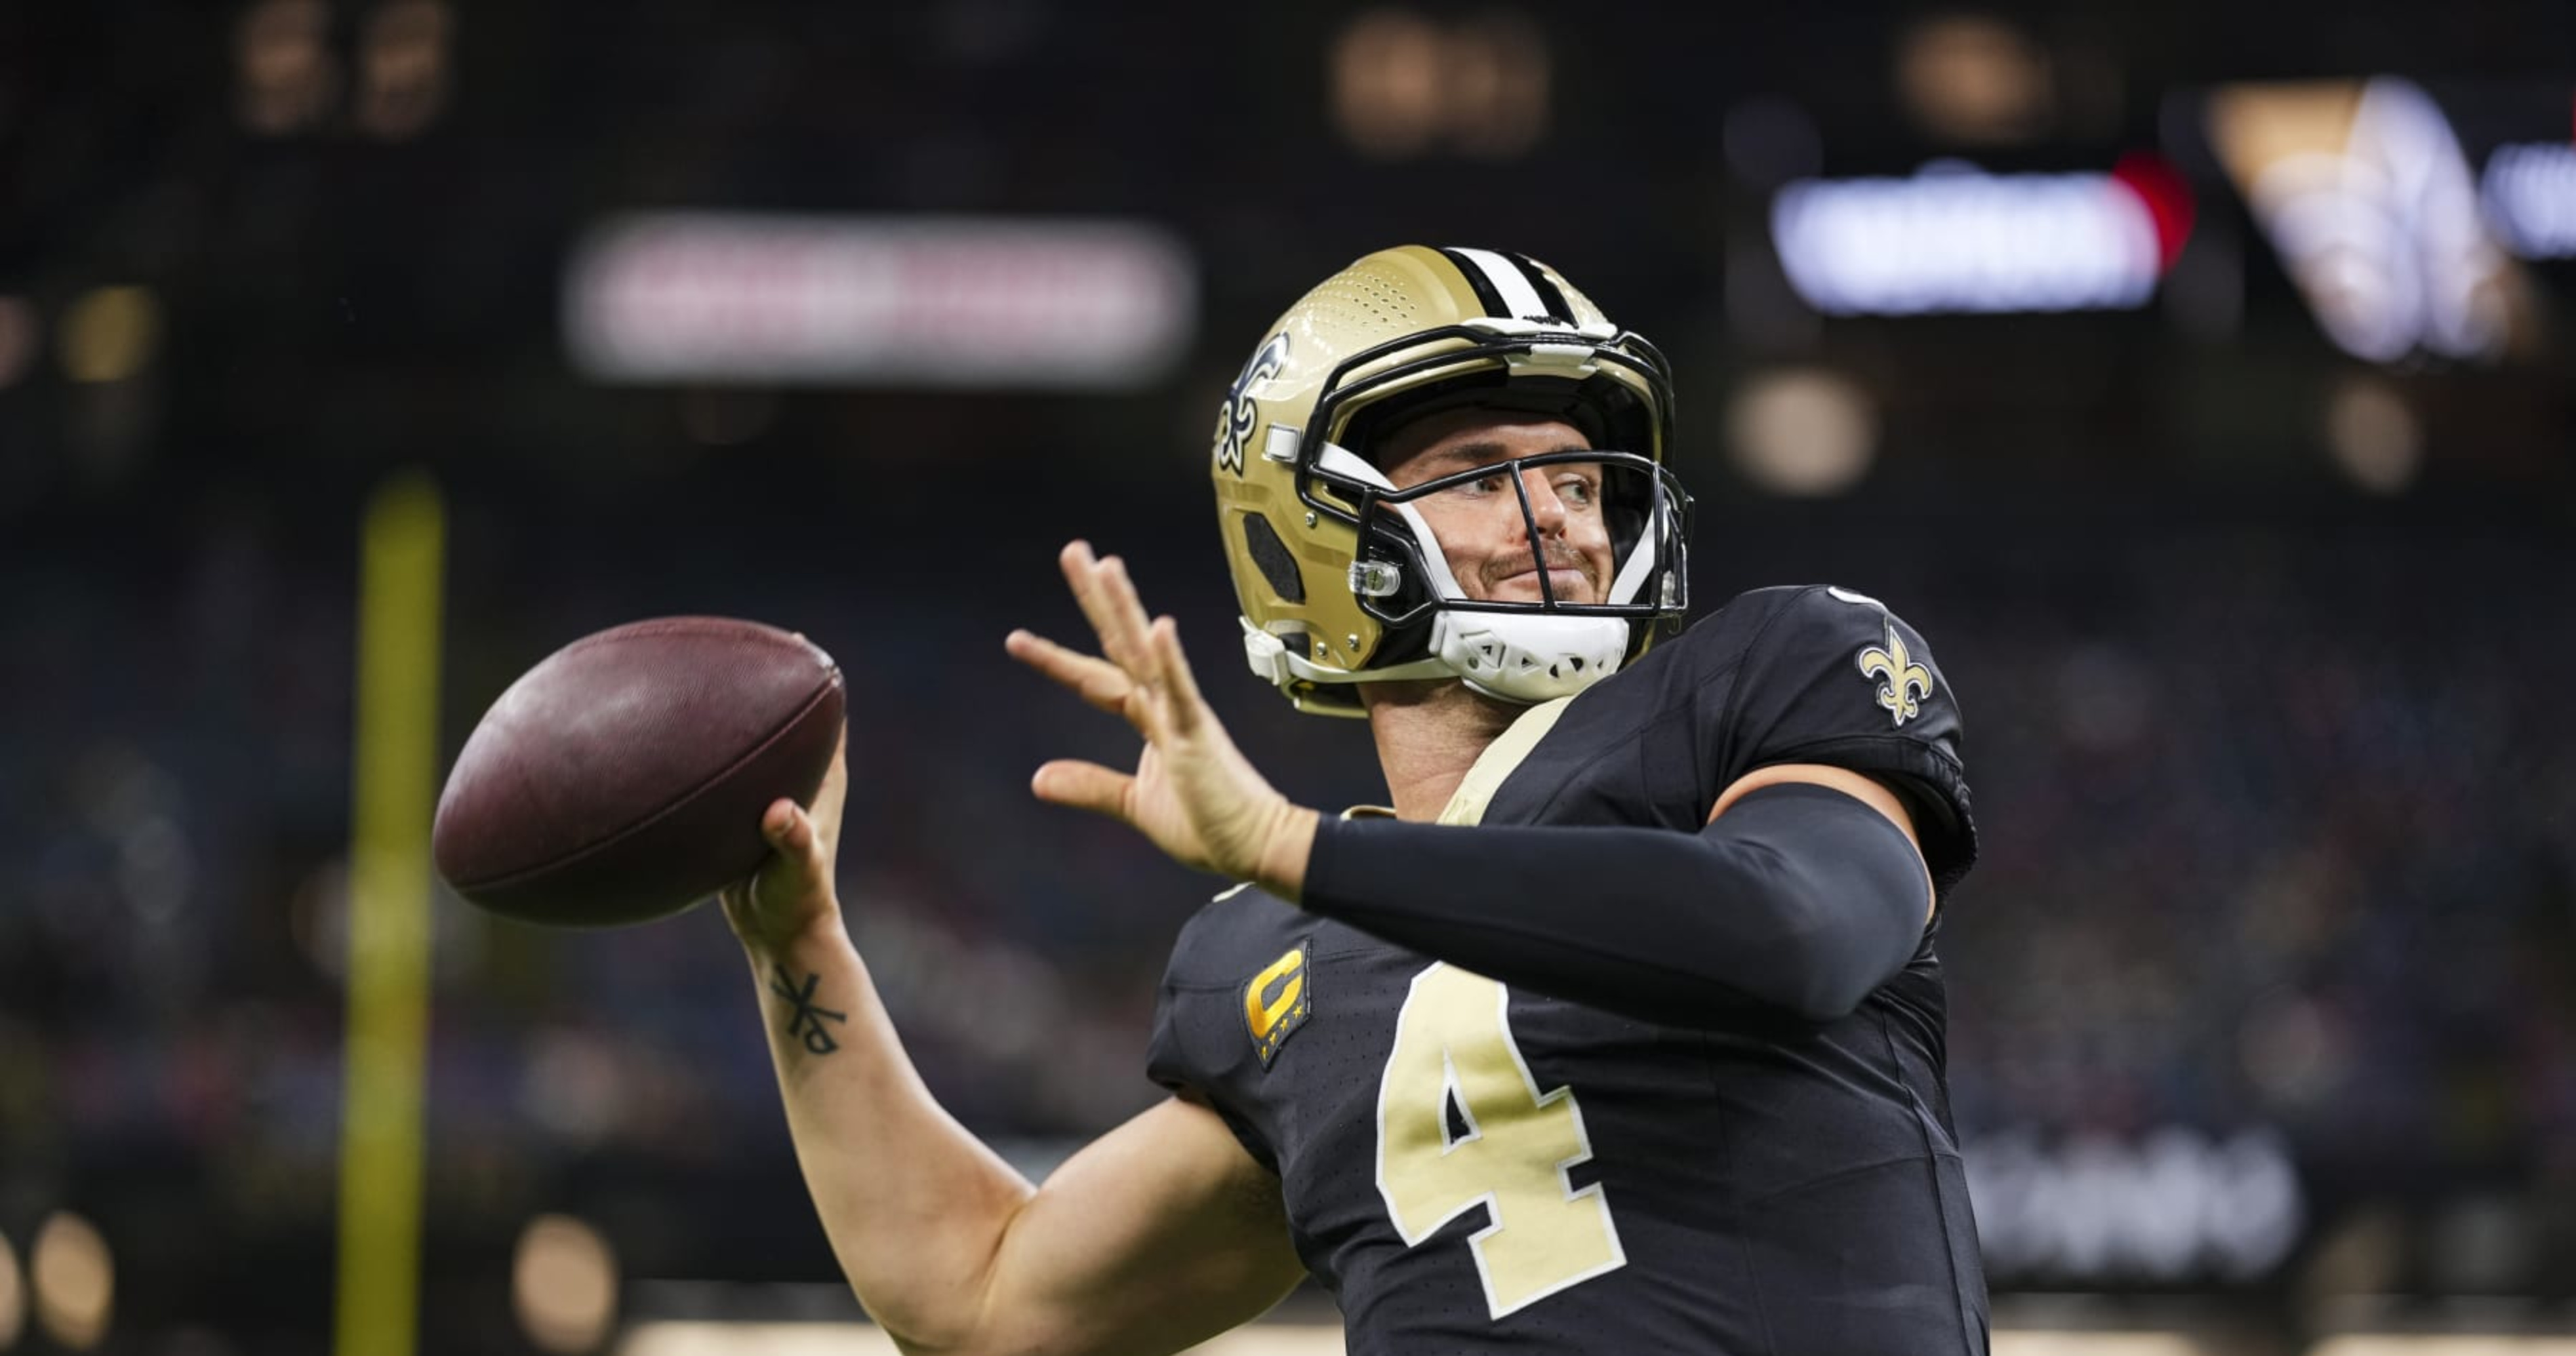 Watch: Why the New Orleans Saints are favored in MNF matchup with Carolina